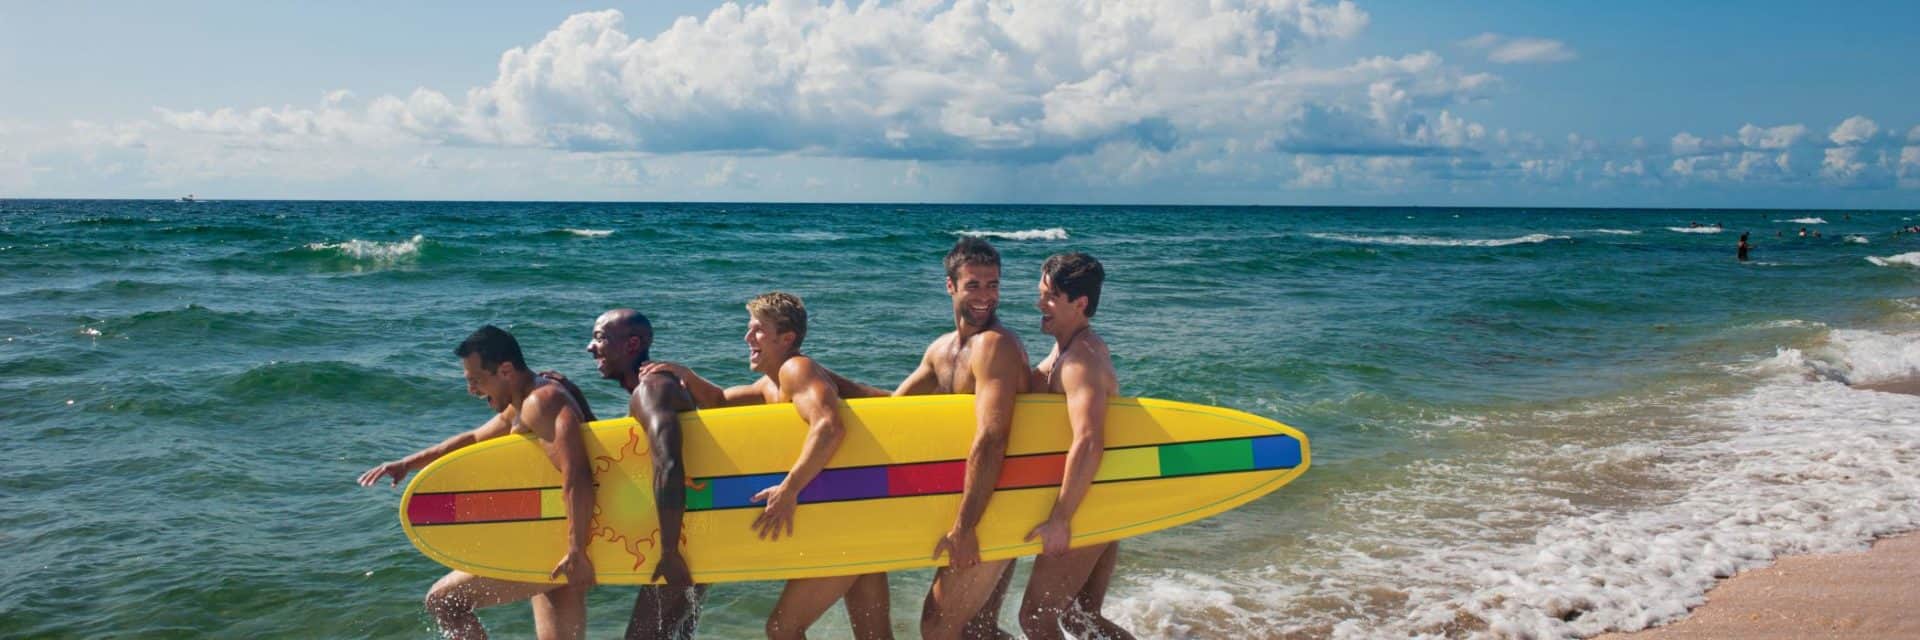 Fort Lauderdale gay vacations